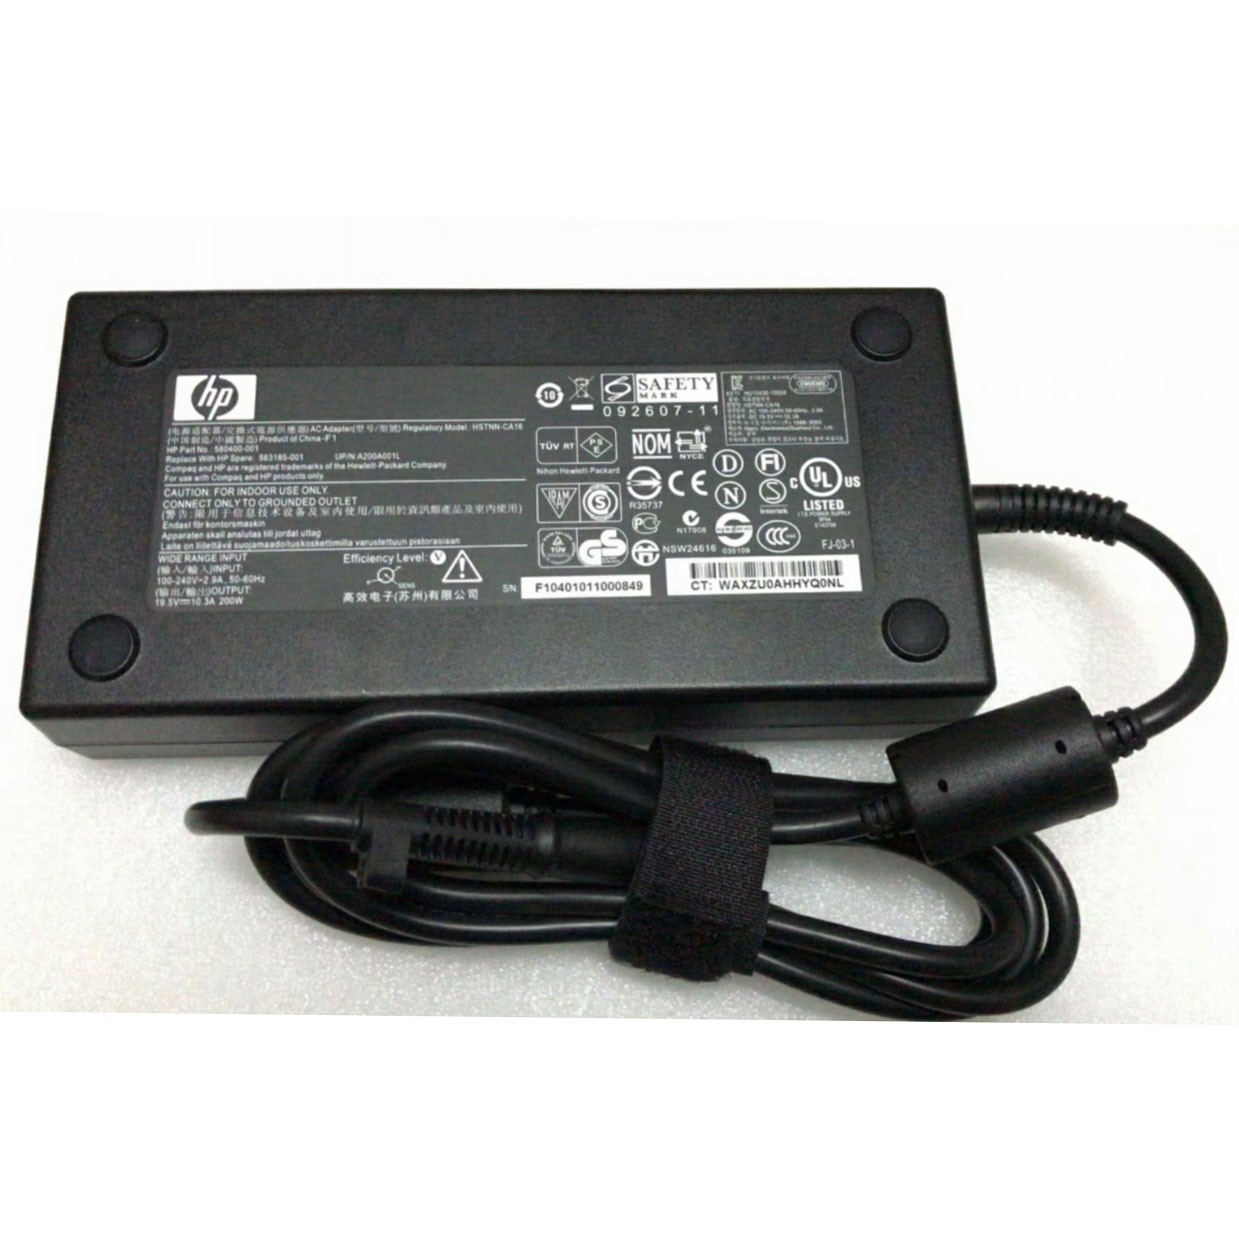 Genuine 200W HP ZBook 17 Mobile Workstation AC Adapter Charger Power Cord Laptop Power Supply Adapter Cord